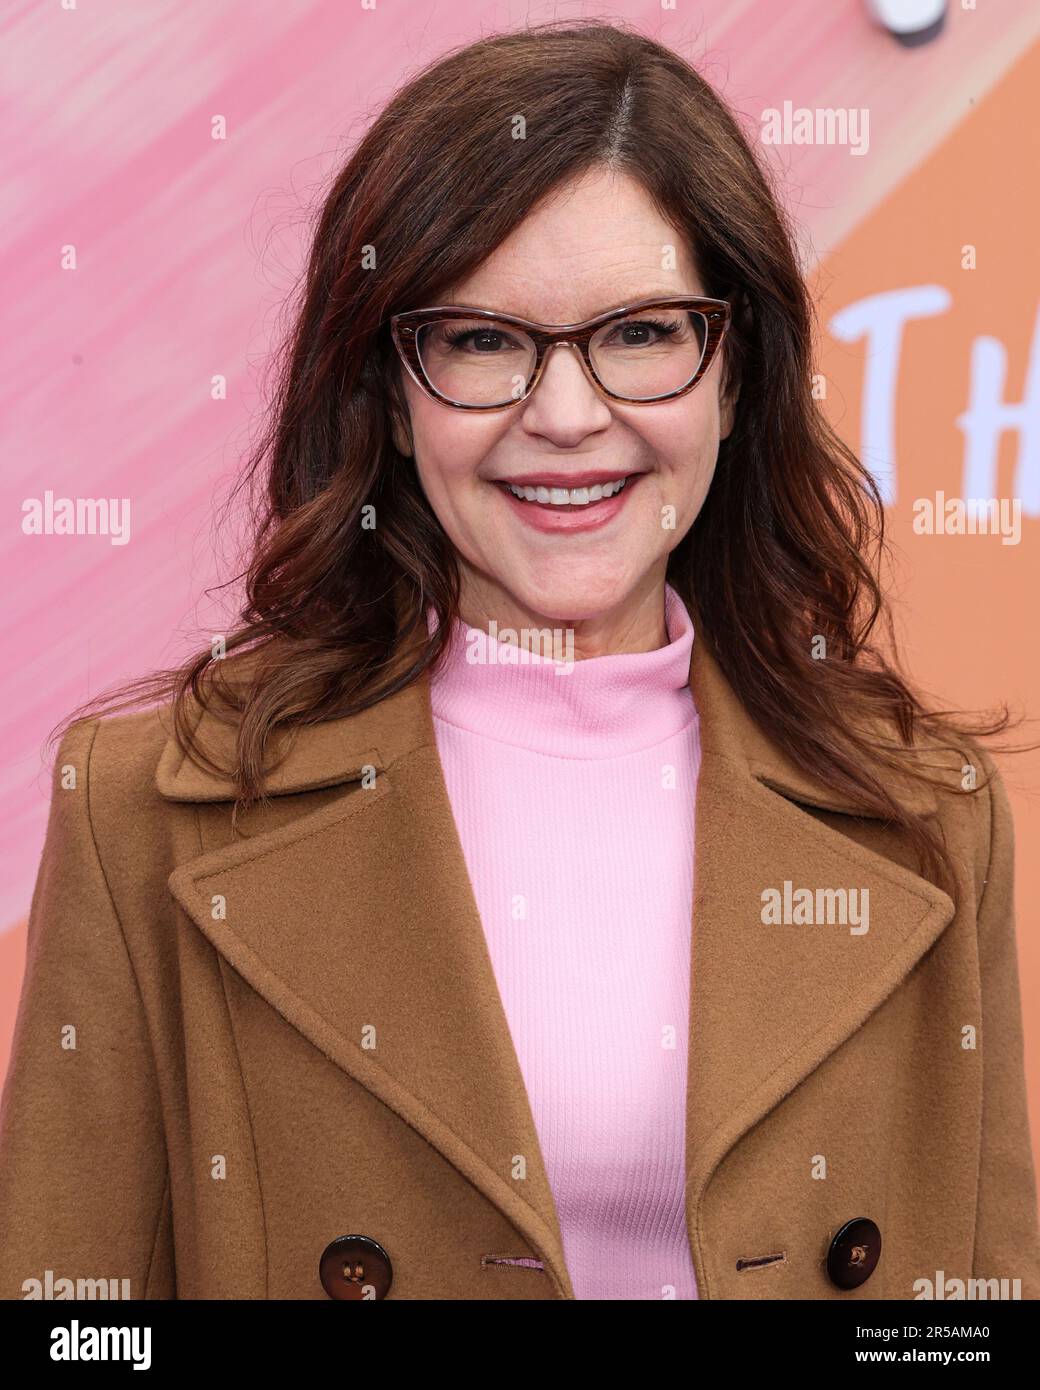 WESTWOOD, LOS ANGELES, CALIFORNIA, USA - JUNE 01: Lisa Loeb arrives at the Los Angeles Premiere Screening Event Of Netflix's 'Never Have I Ever' Season 4 - The Final Season held at the Regency Village Theatre on June 1, 2023 in Westwood, Los Angeles, California, United States. (Photo by Xavier Collin/Image Press Agency) Stock Photo